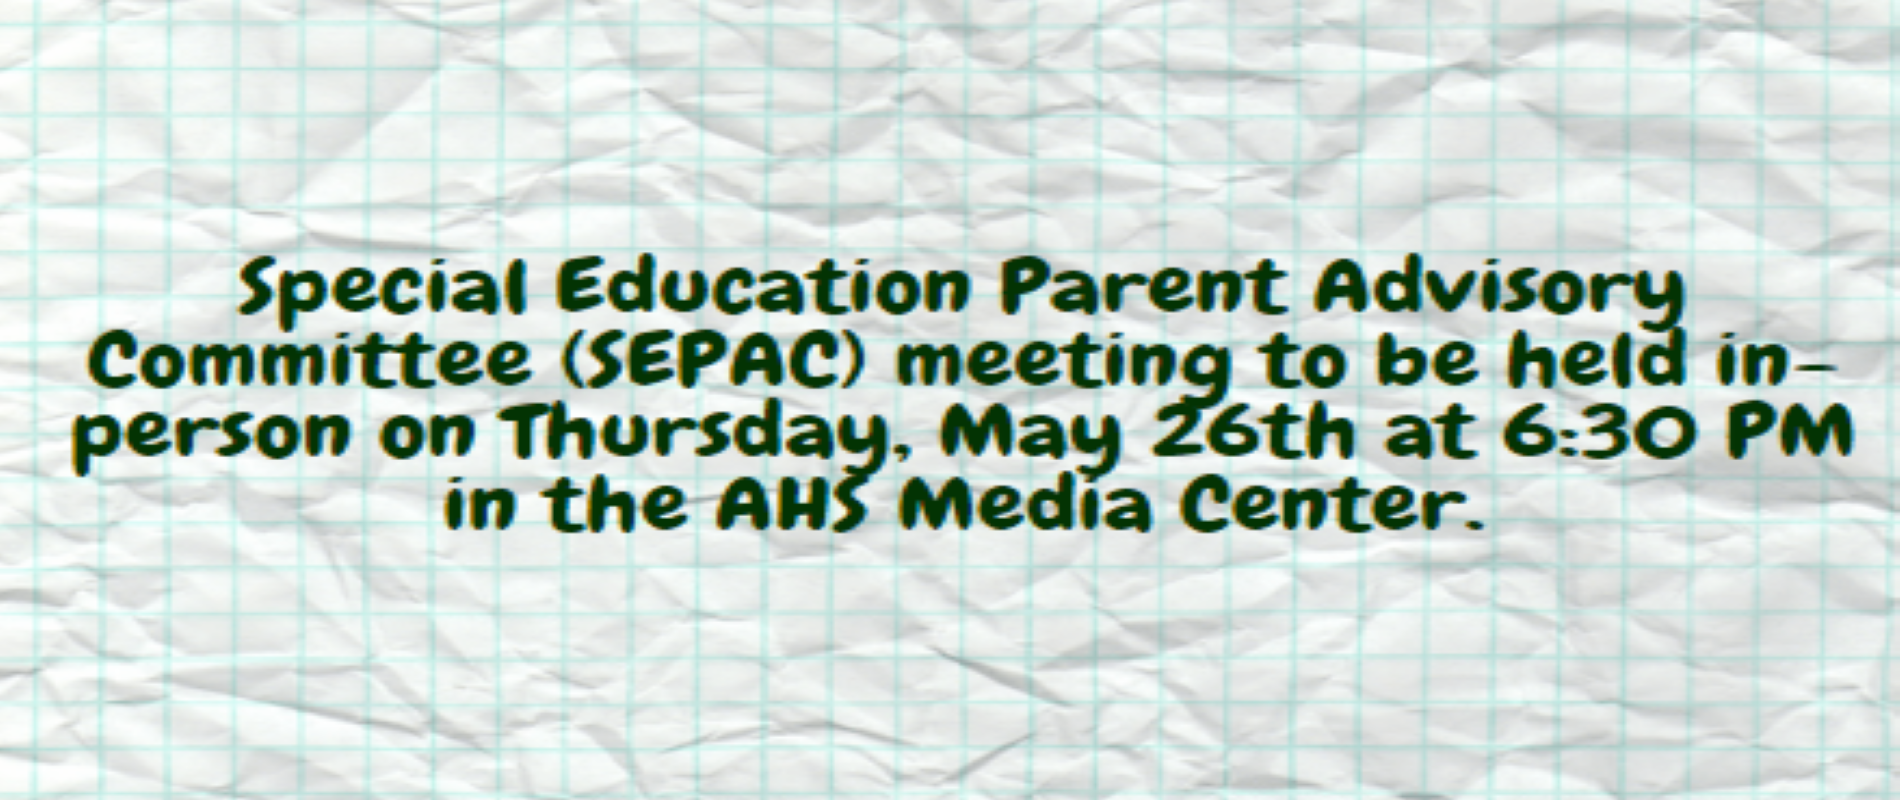 Special Education Parent Advisory Committee (SEPAC) meeting 